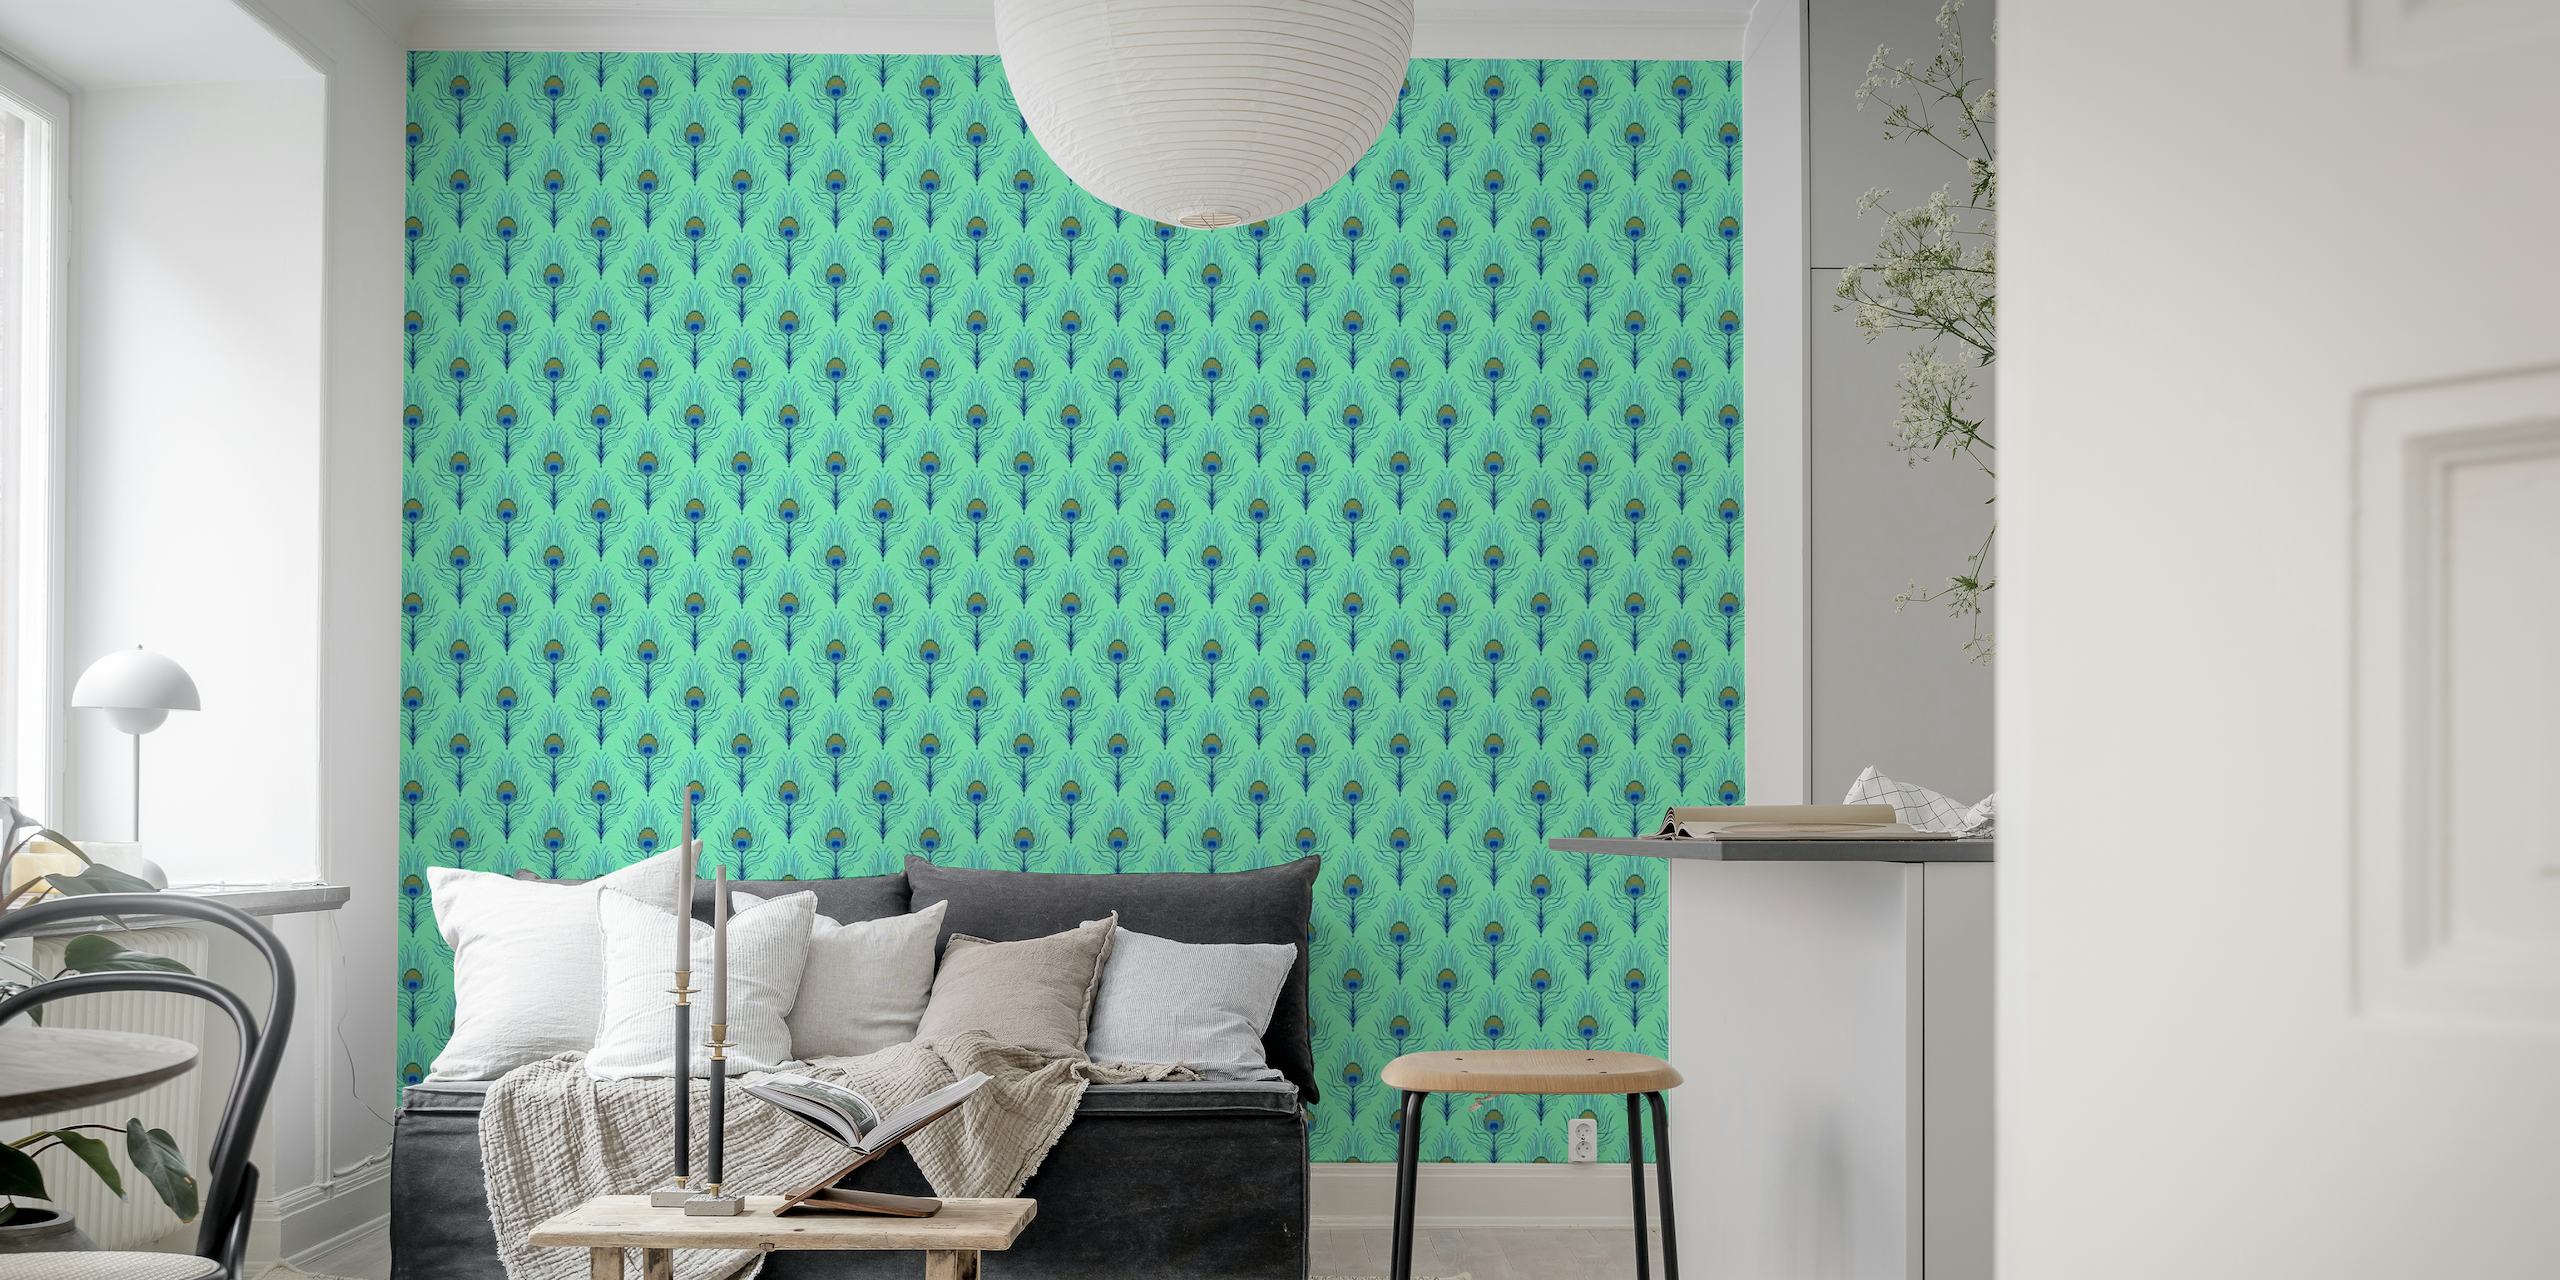 Elegant watercolor peacock feathers wall mural in shades of turquoise and green